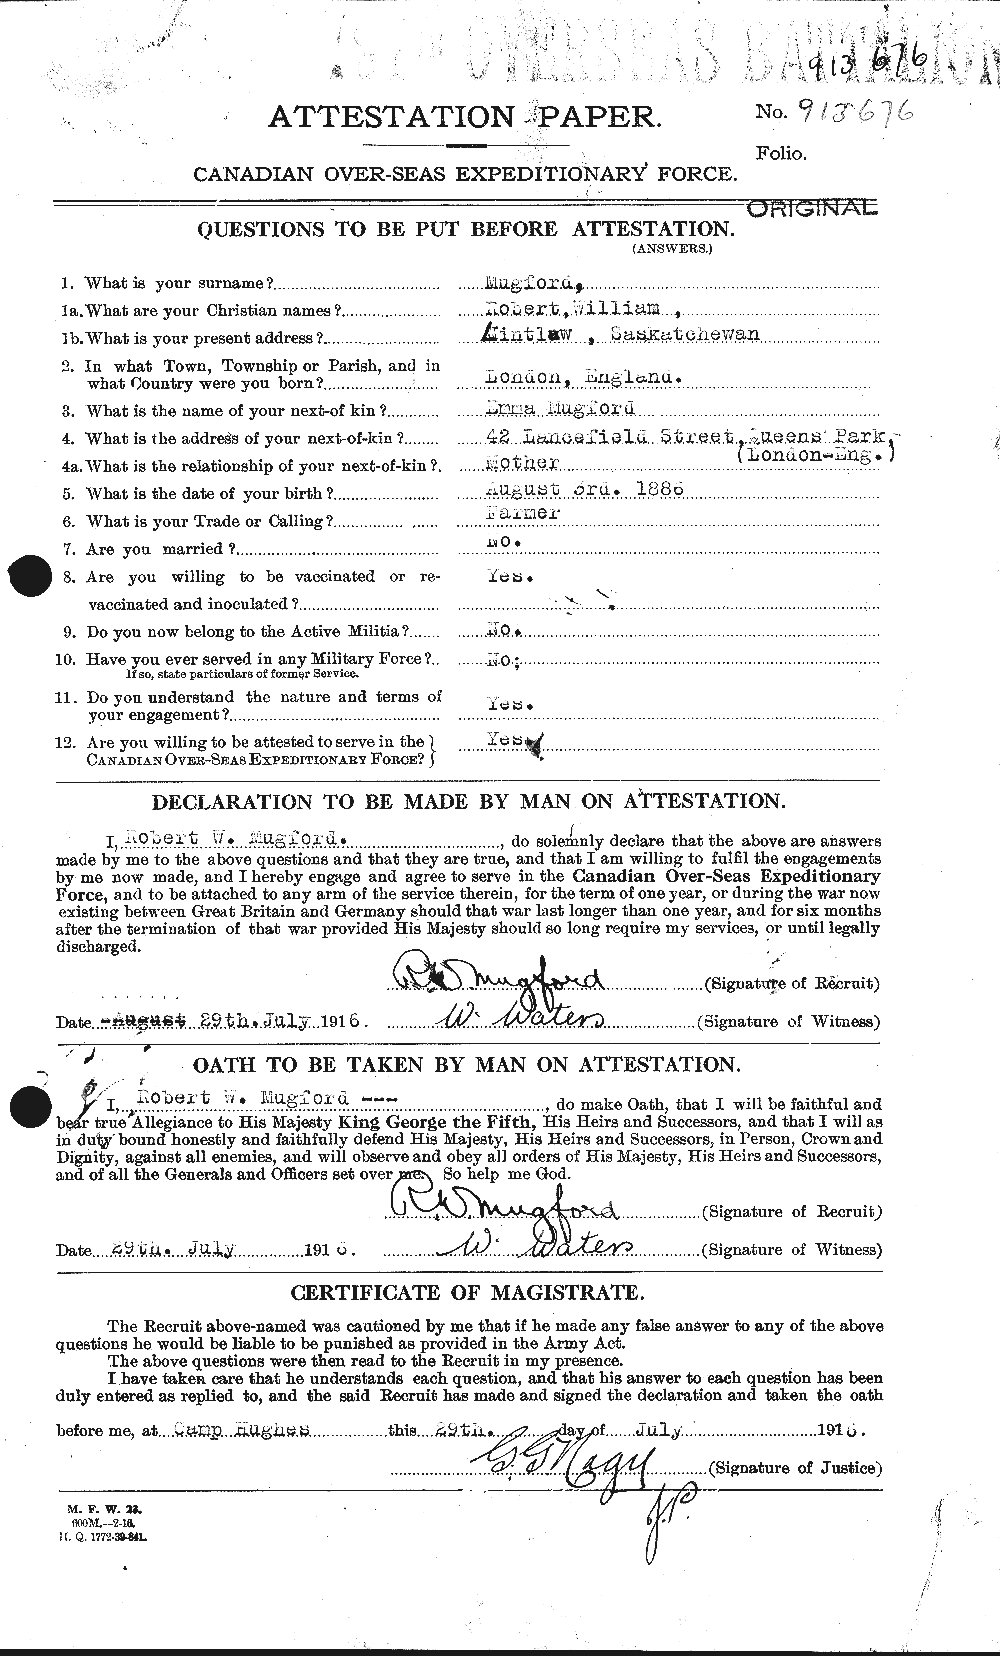 Personnel Records of the First World War - CEF 509462a